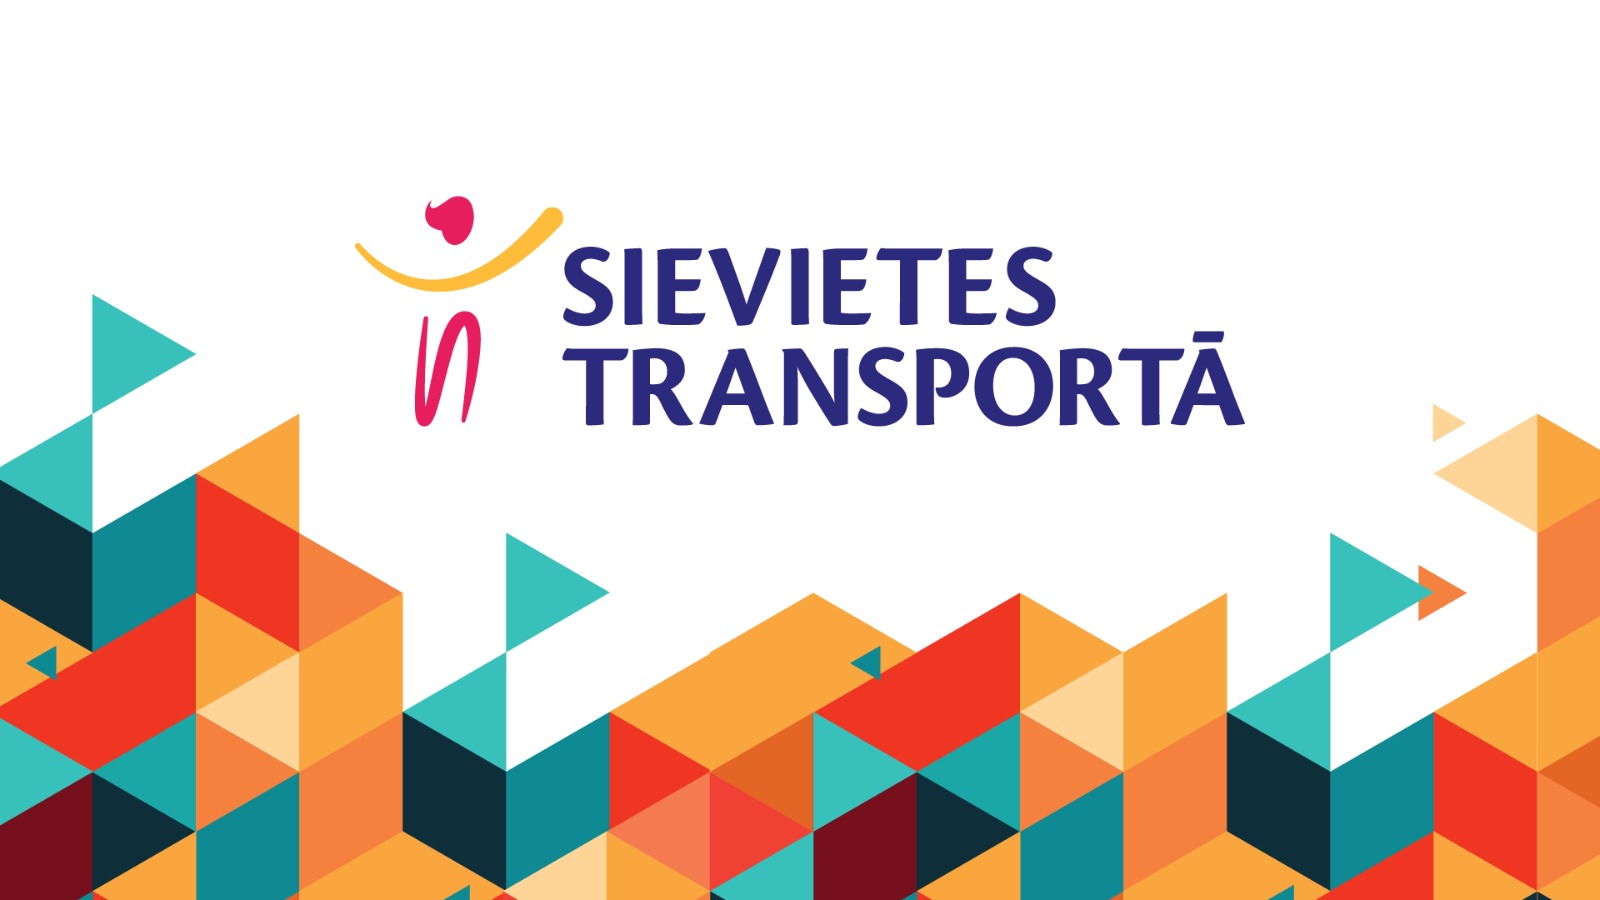 Join and Learn More: Strategic Conference “Woman in Transport”